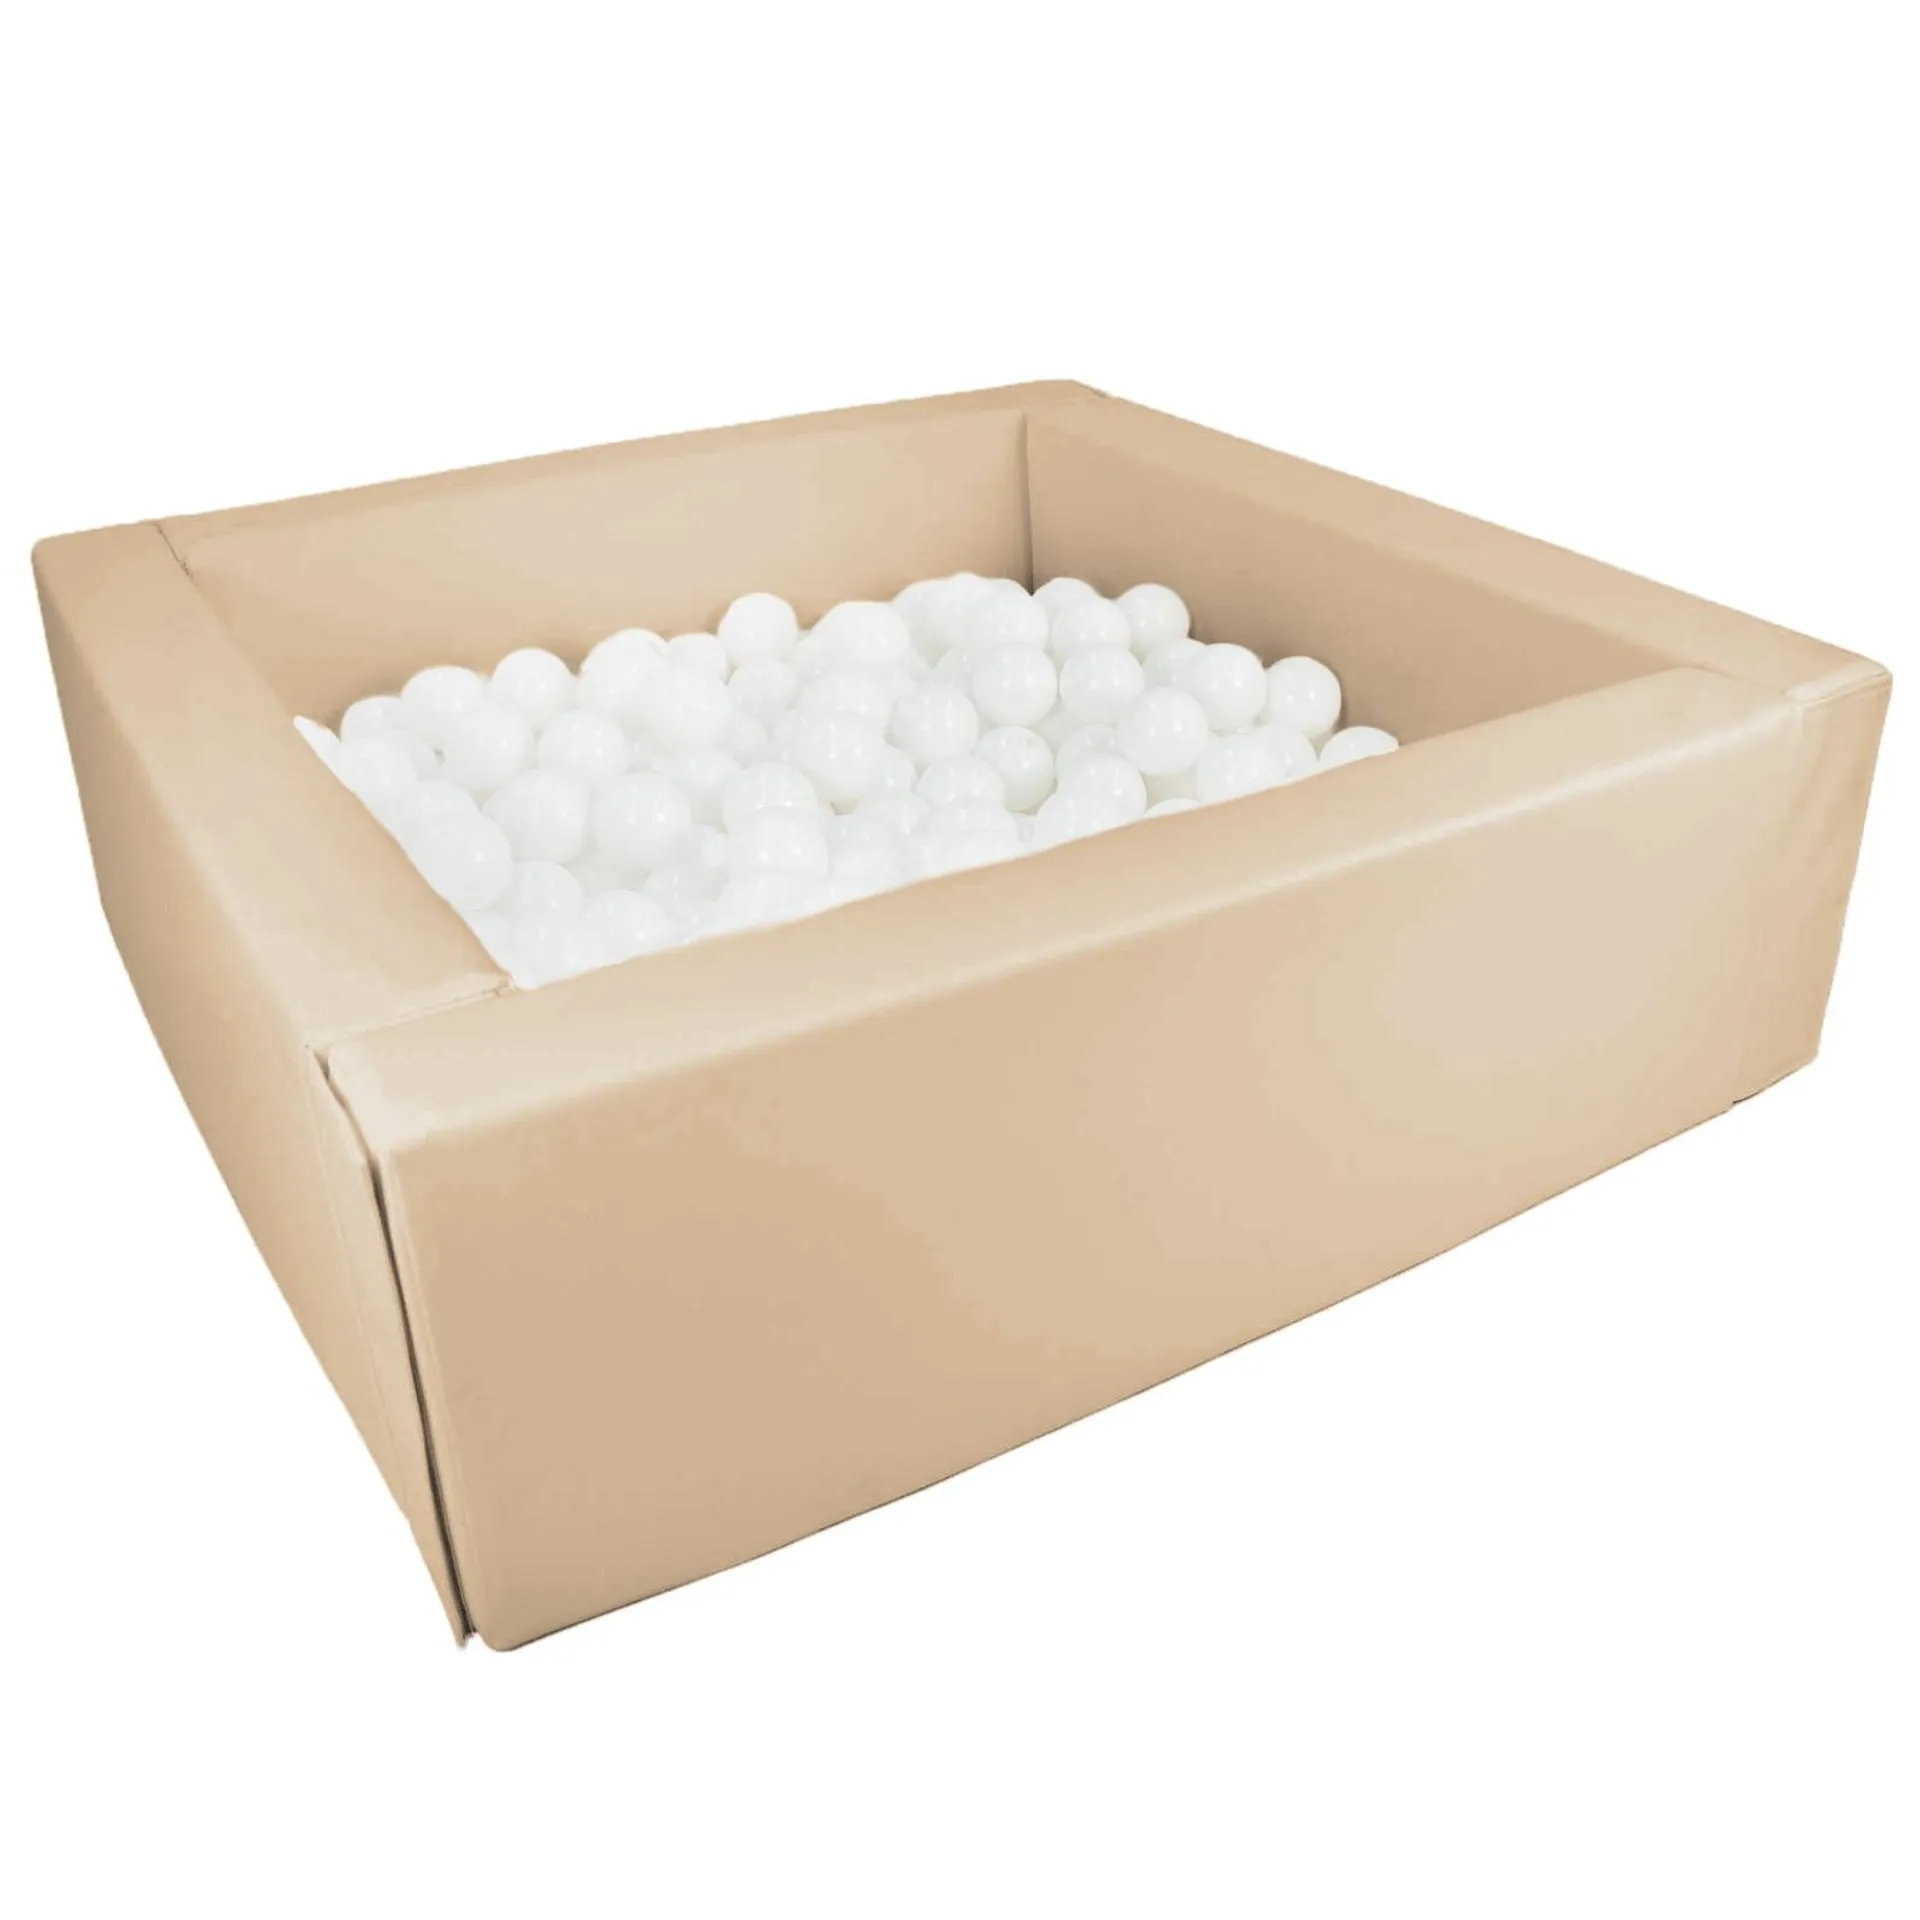 Pre Order Eco Leather Beige Soft Play Ball Pit - 200 white balls